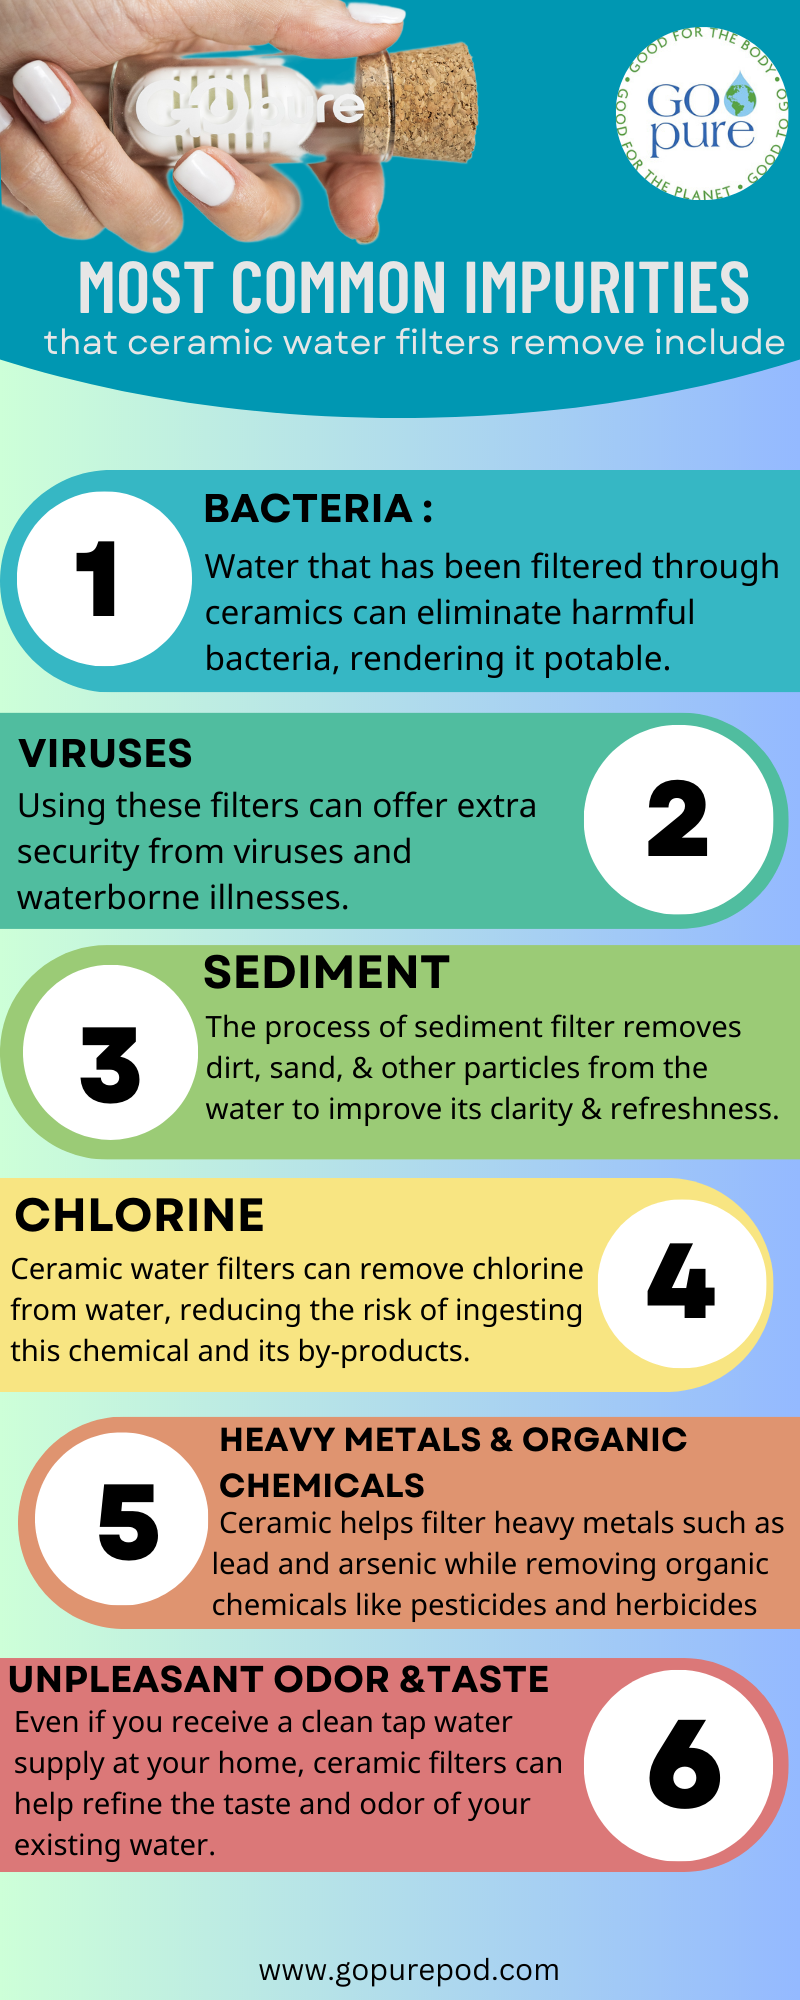 Most common impurities that ceramic water filters remove include